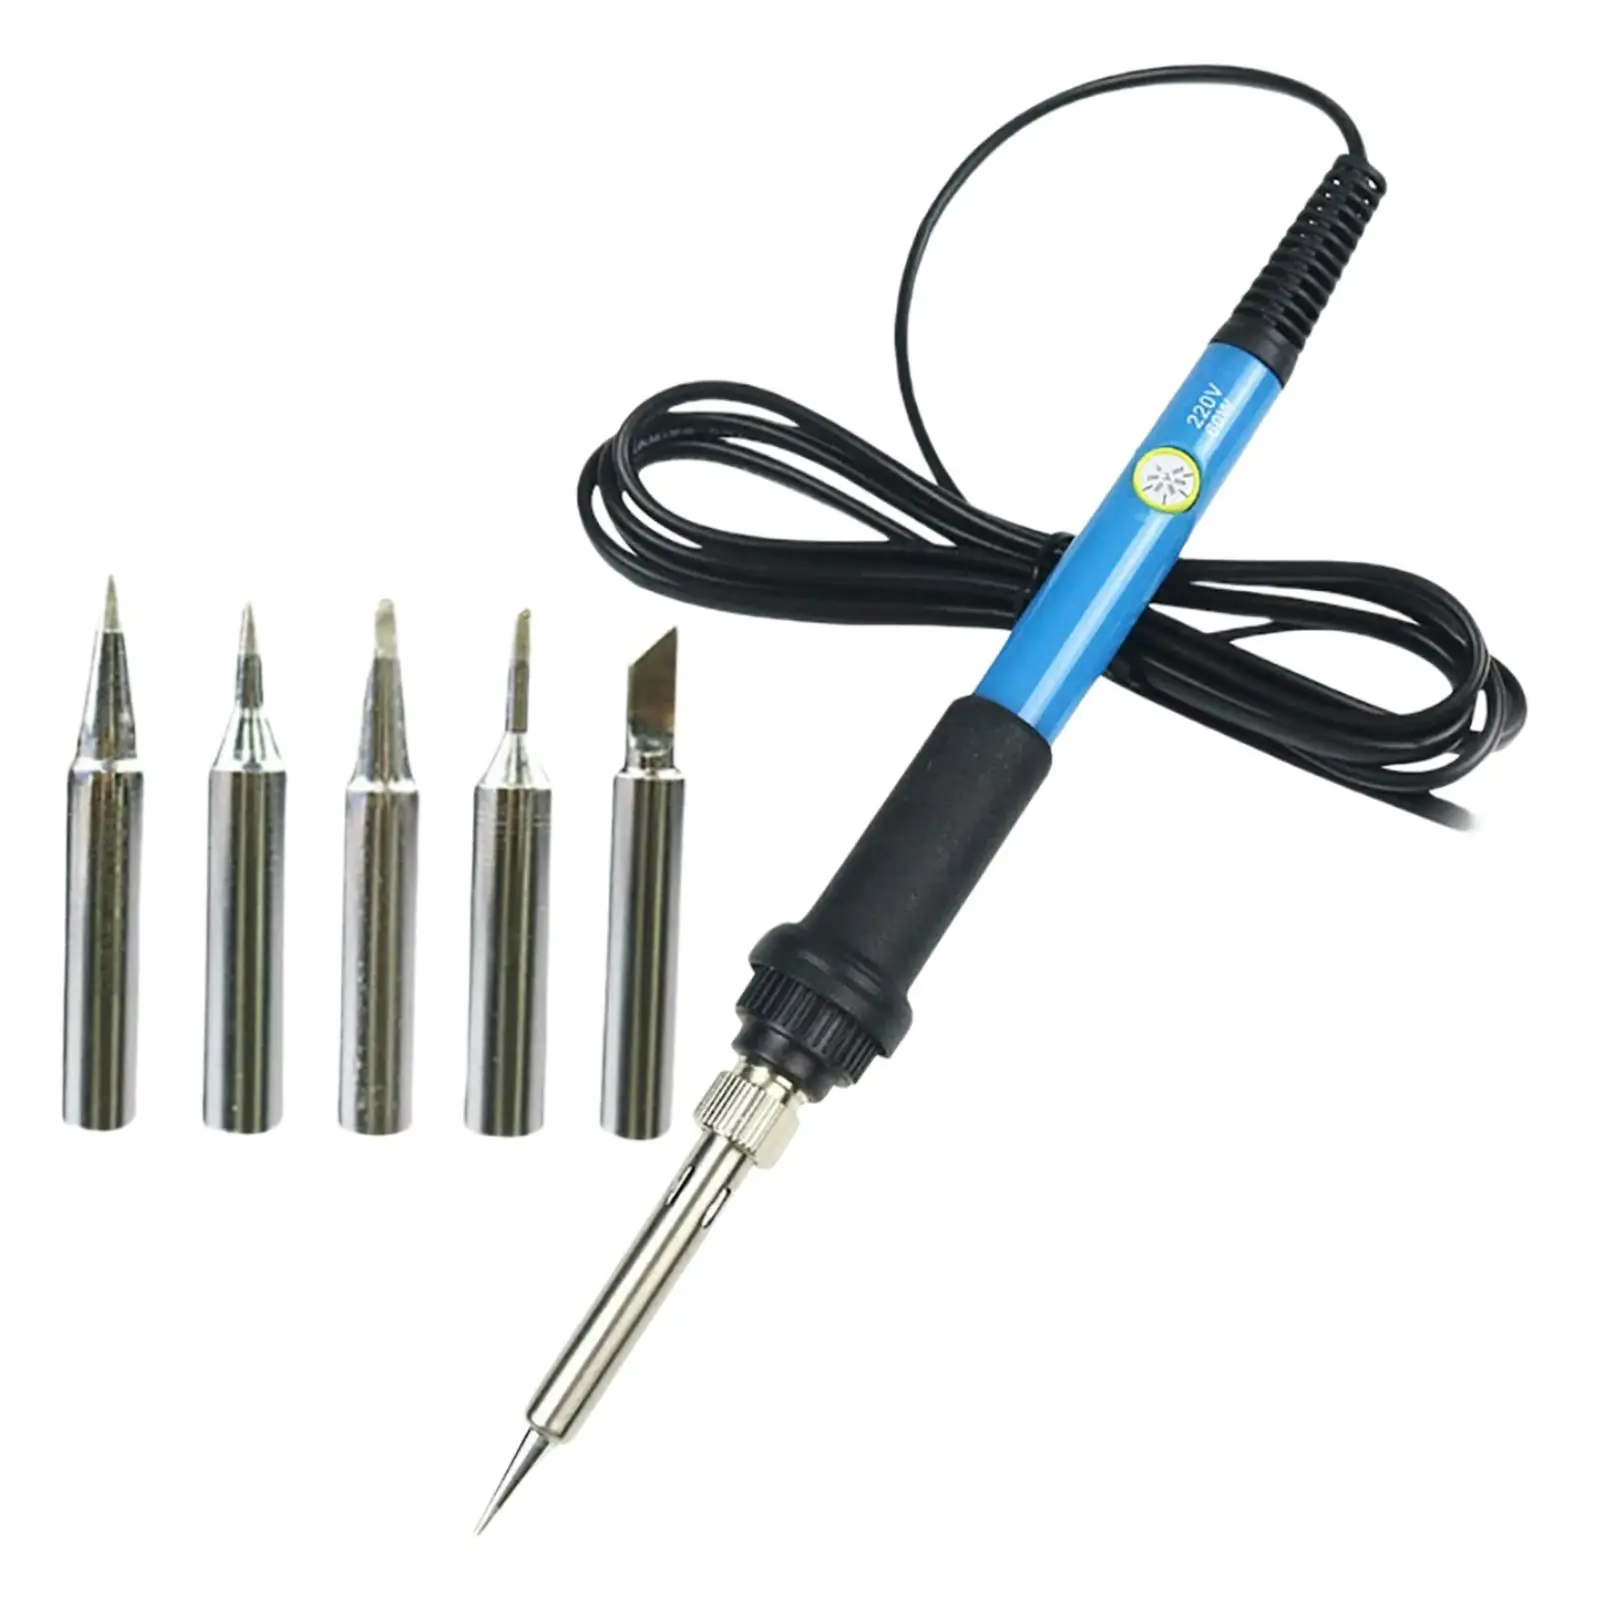 Professional Temperature Soldering Iron Set Electric Soldering Iron Kit for Home